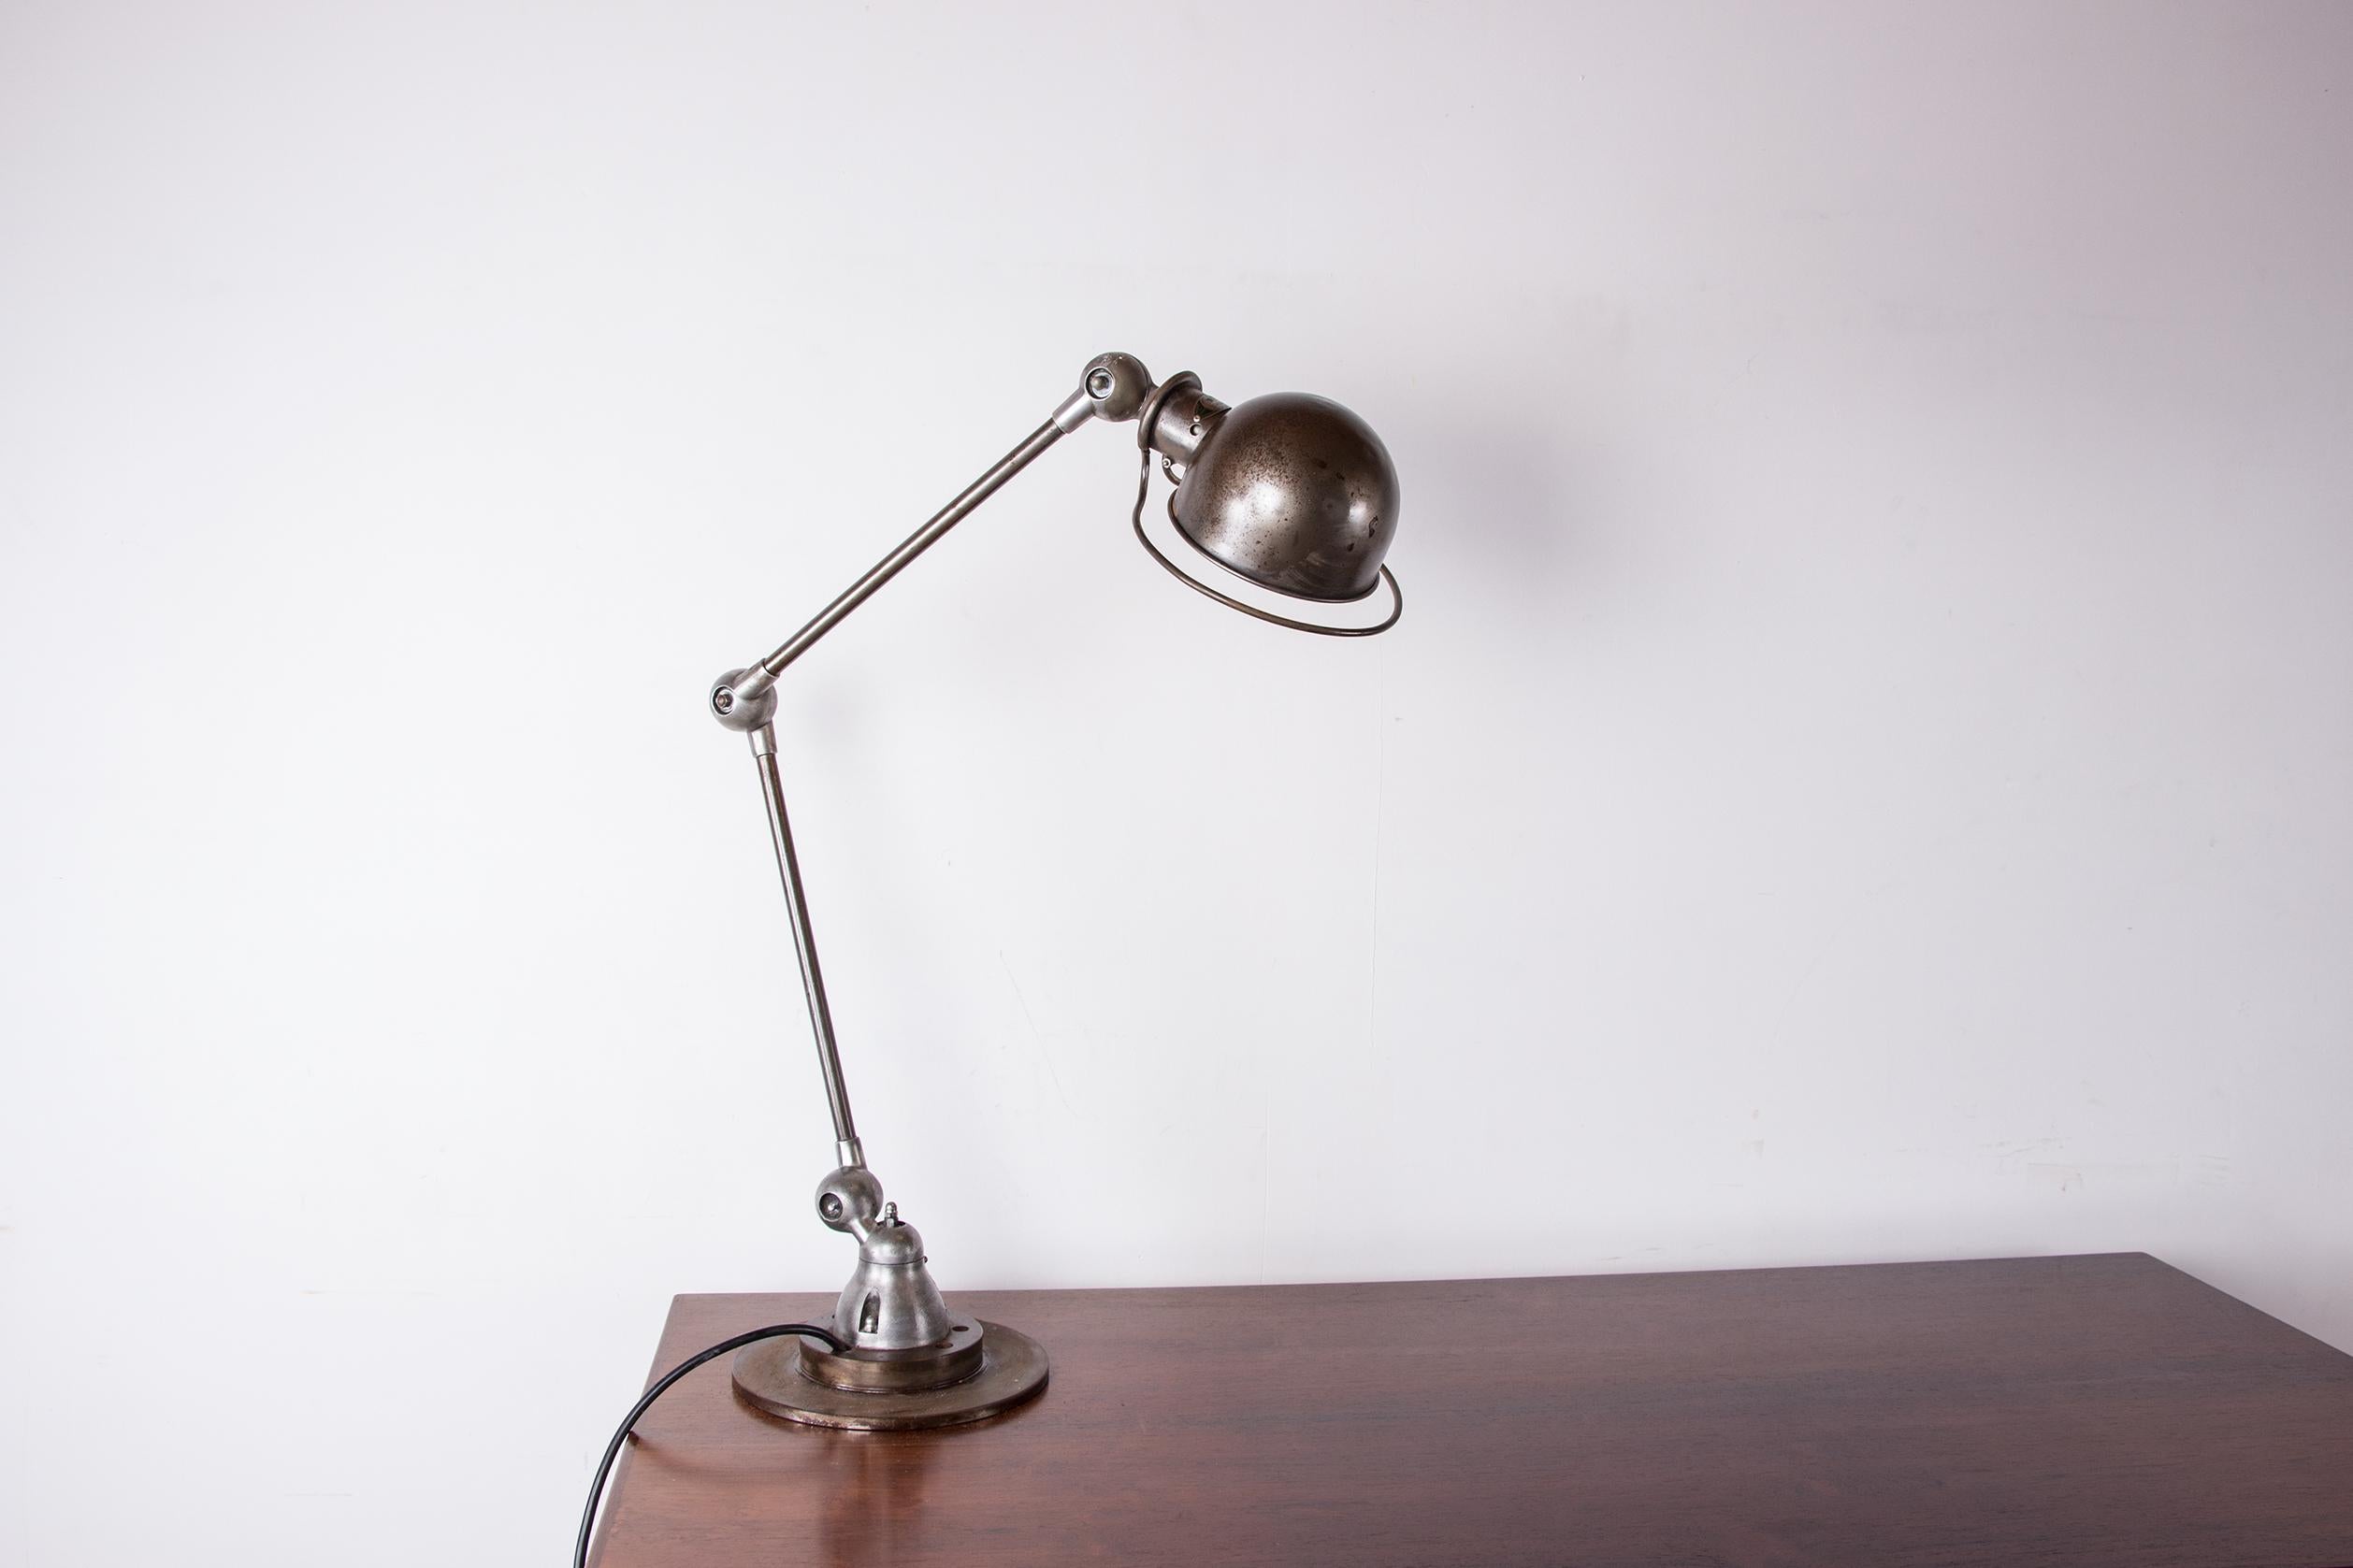 Superb old desk lamp. 
Marked industrial style for this Iconic lamp with a very beautiful patina and perfect lighting. 
The switch is on the lamp itself. The lampshade and arms can rotate in all directions thanks to a wireless system with copper